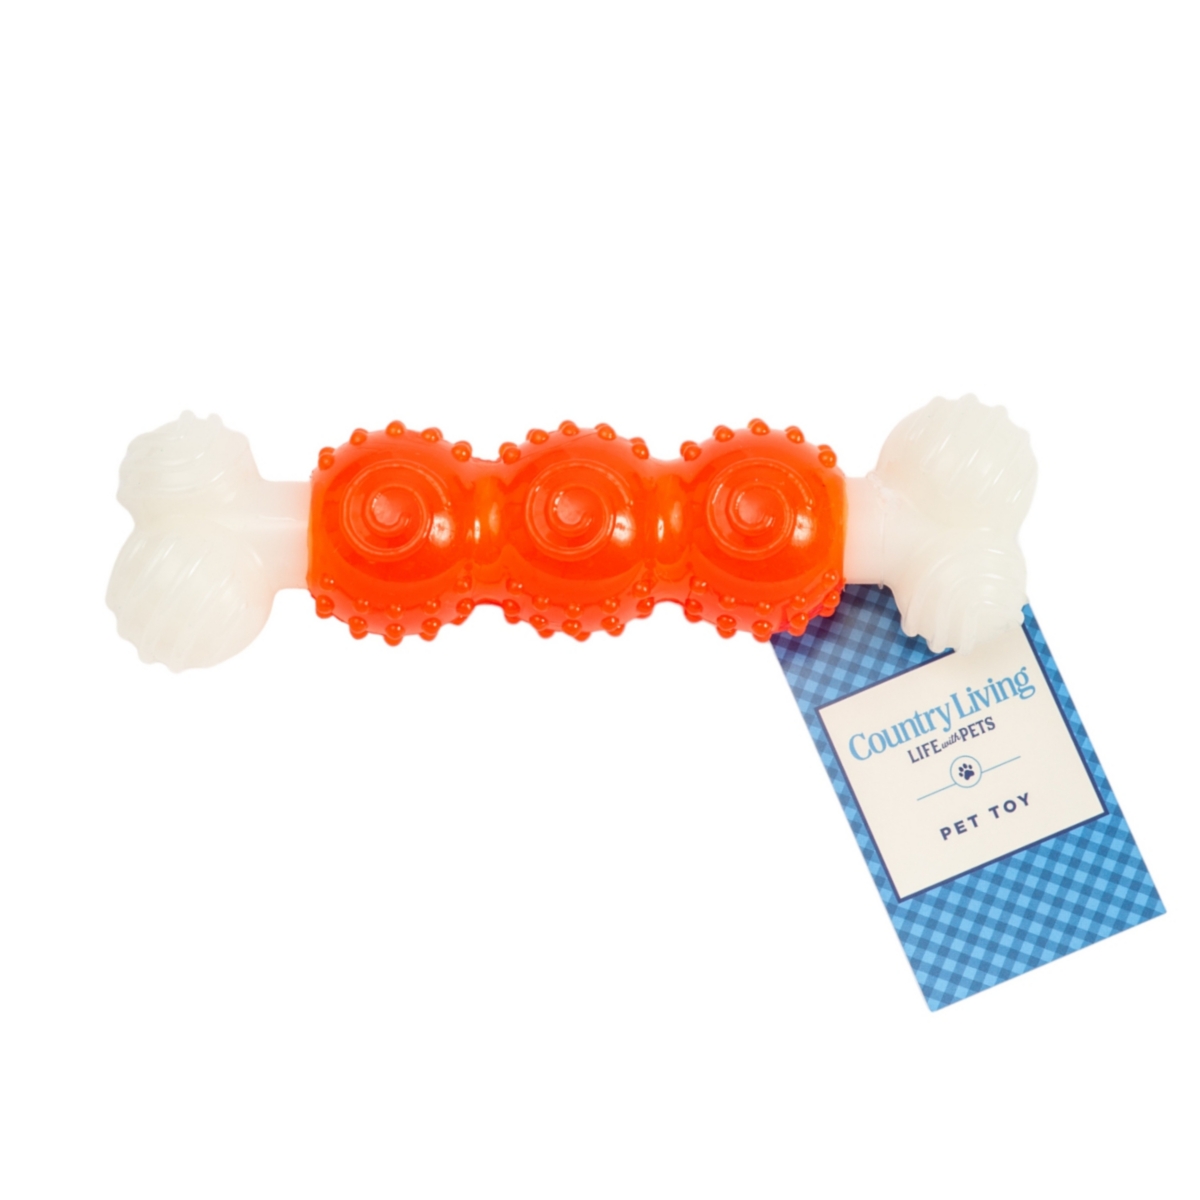 Country Living Durable Tpr Nylon Dog Bone Chew Toy, Orange - Ideal for Puppies and Adult Dogs - Orange